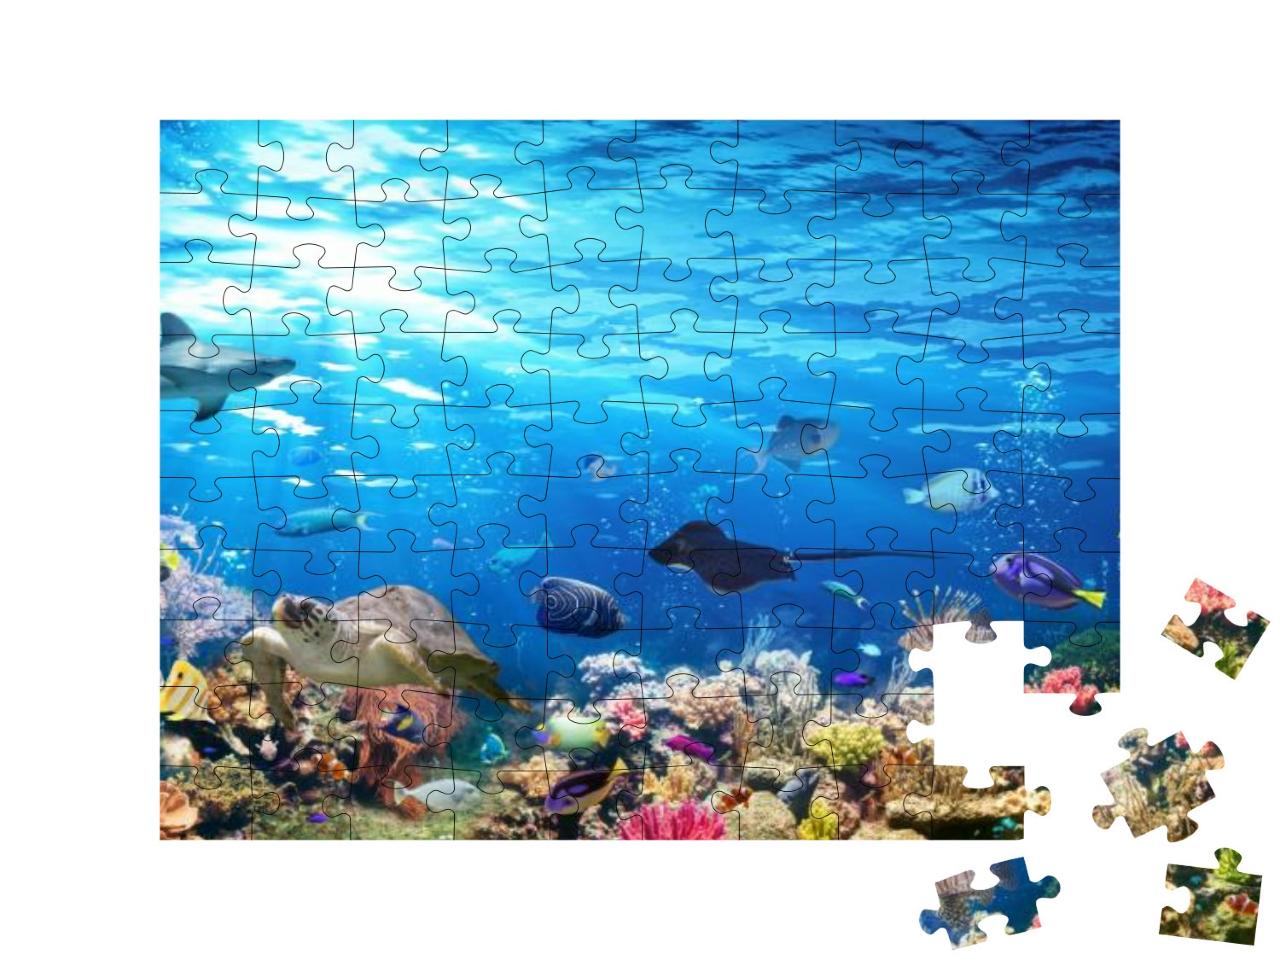 Underwater Scene with Coral Reef & Exotic Fishes... Jigsaw Puzzle with 100 pieces